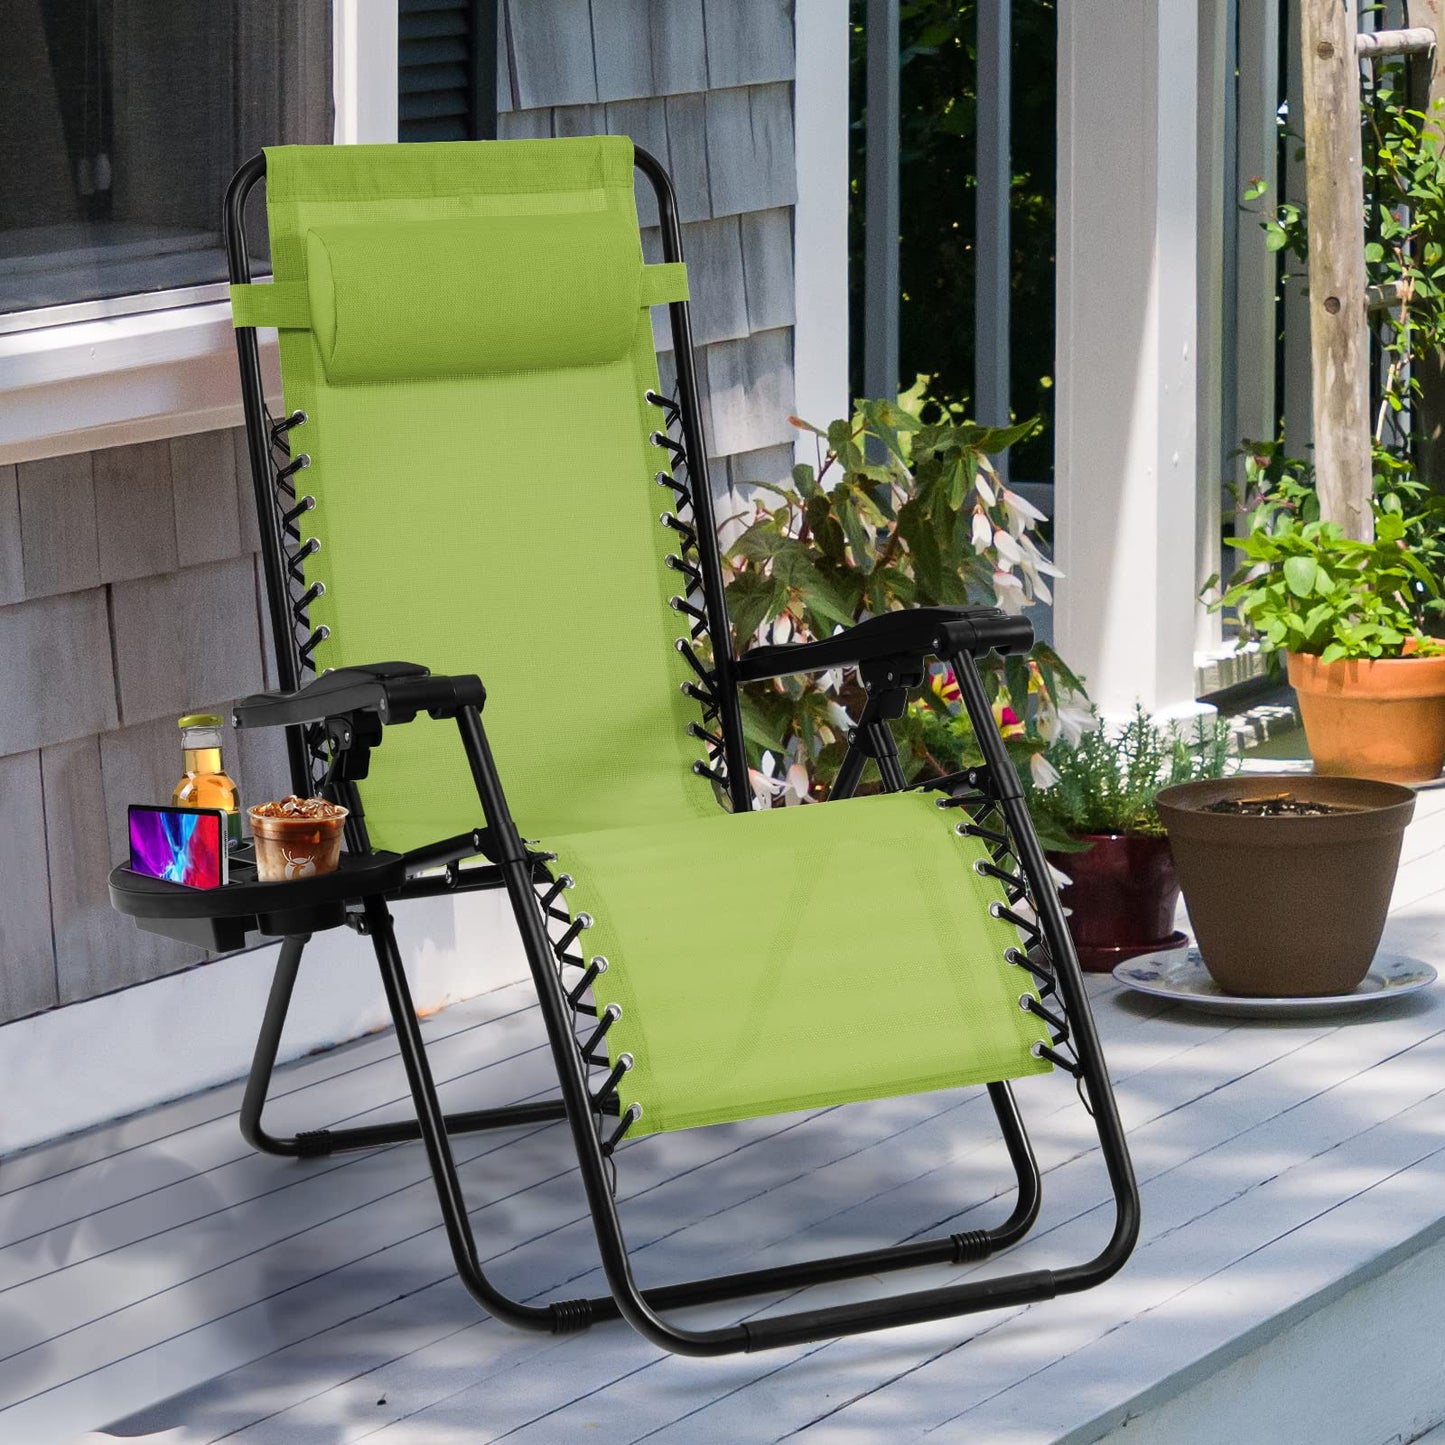 Goplus Zero Gravity Chair, Adjustable Folding Reclining Lounge Chair with Pillow and Cup Holder, Patio Lawn Recliner for Outdoor Pool Camp Yard (1, Green) set of 1